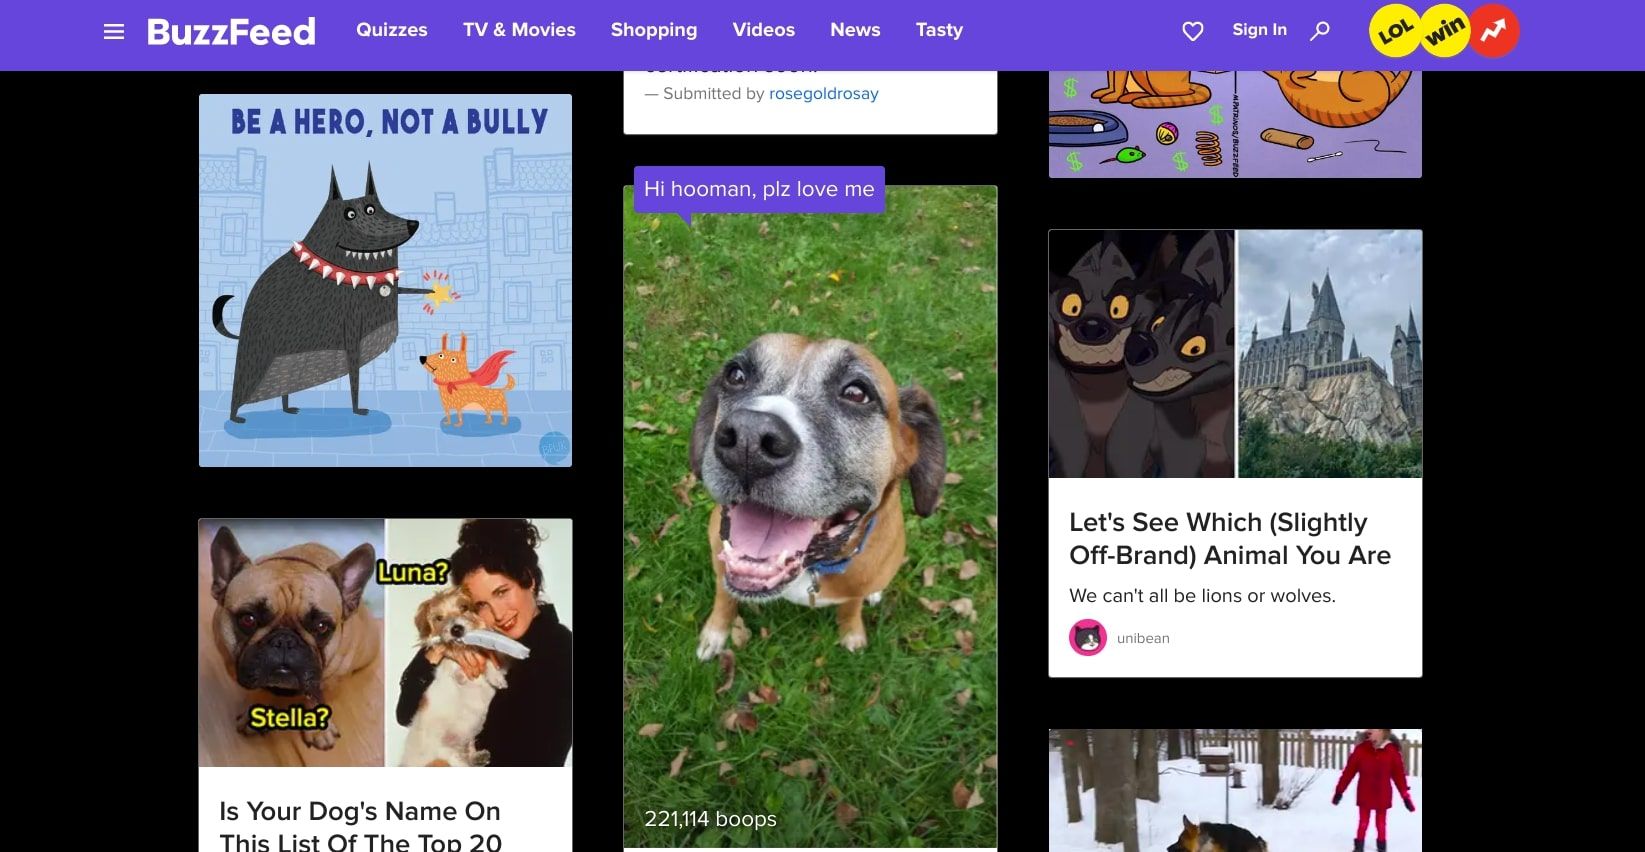 A screenshot of the animals section of the Buzzfeed website